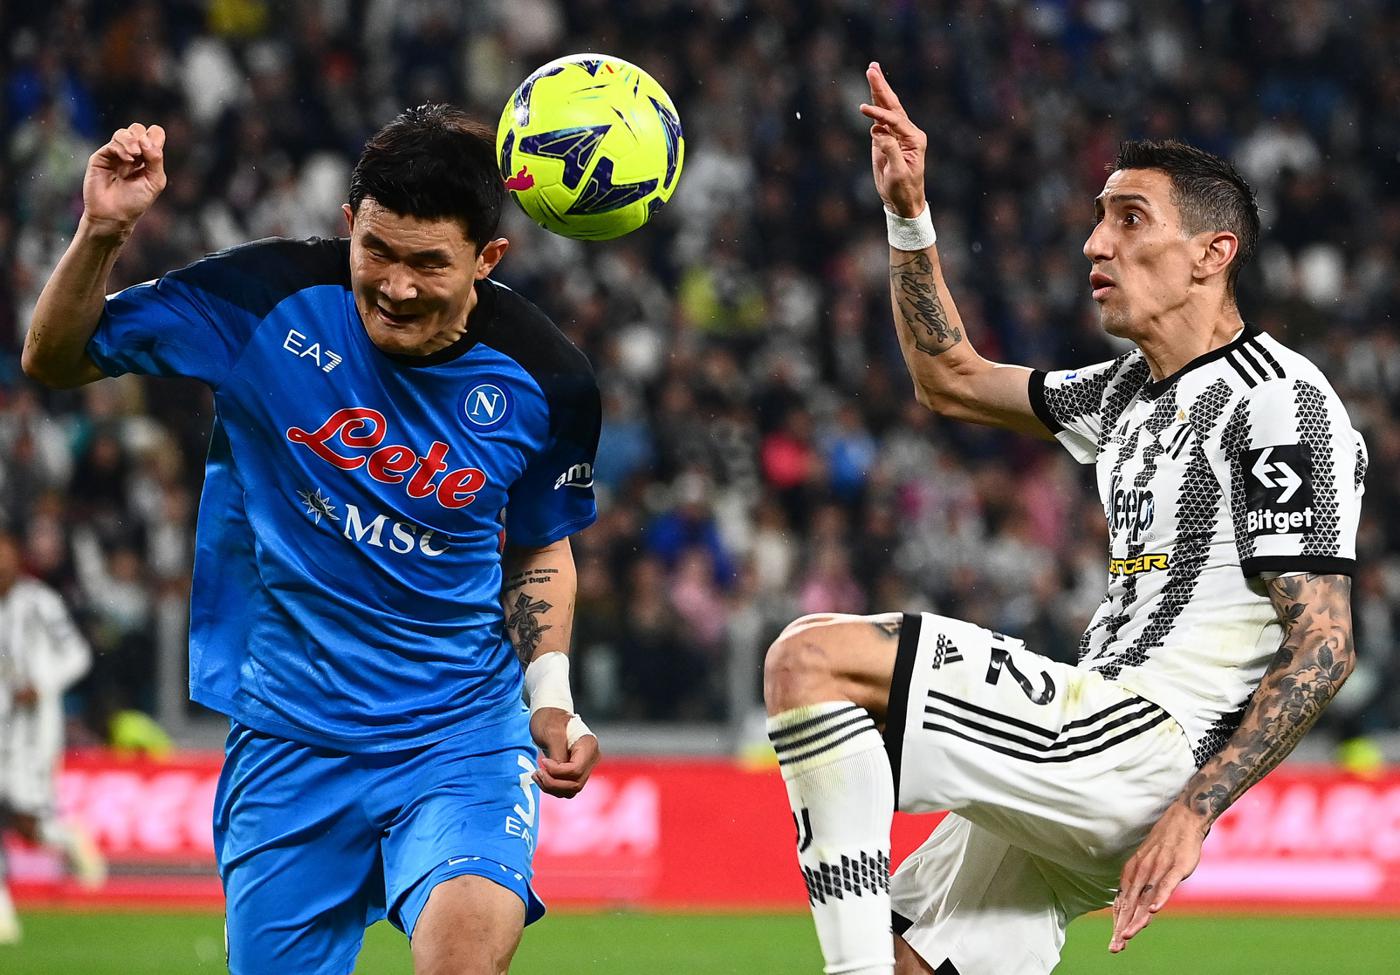 Juventus - Napoli: where to watch, online broadcast (April 23)